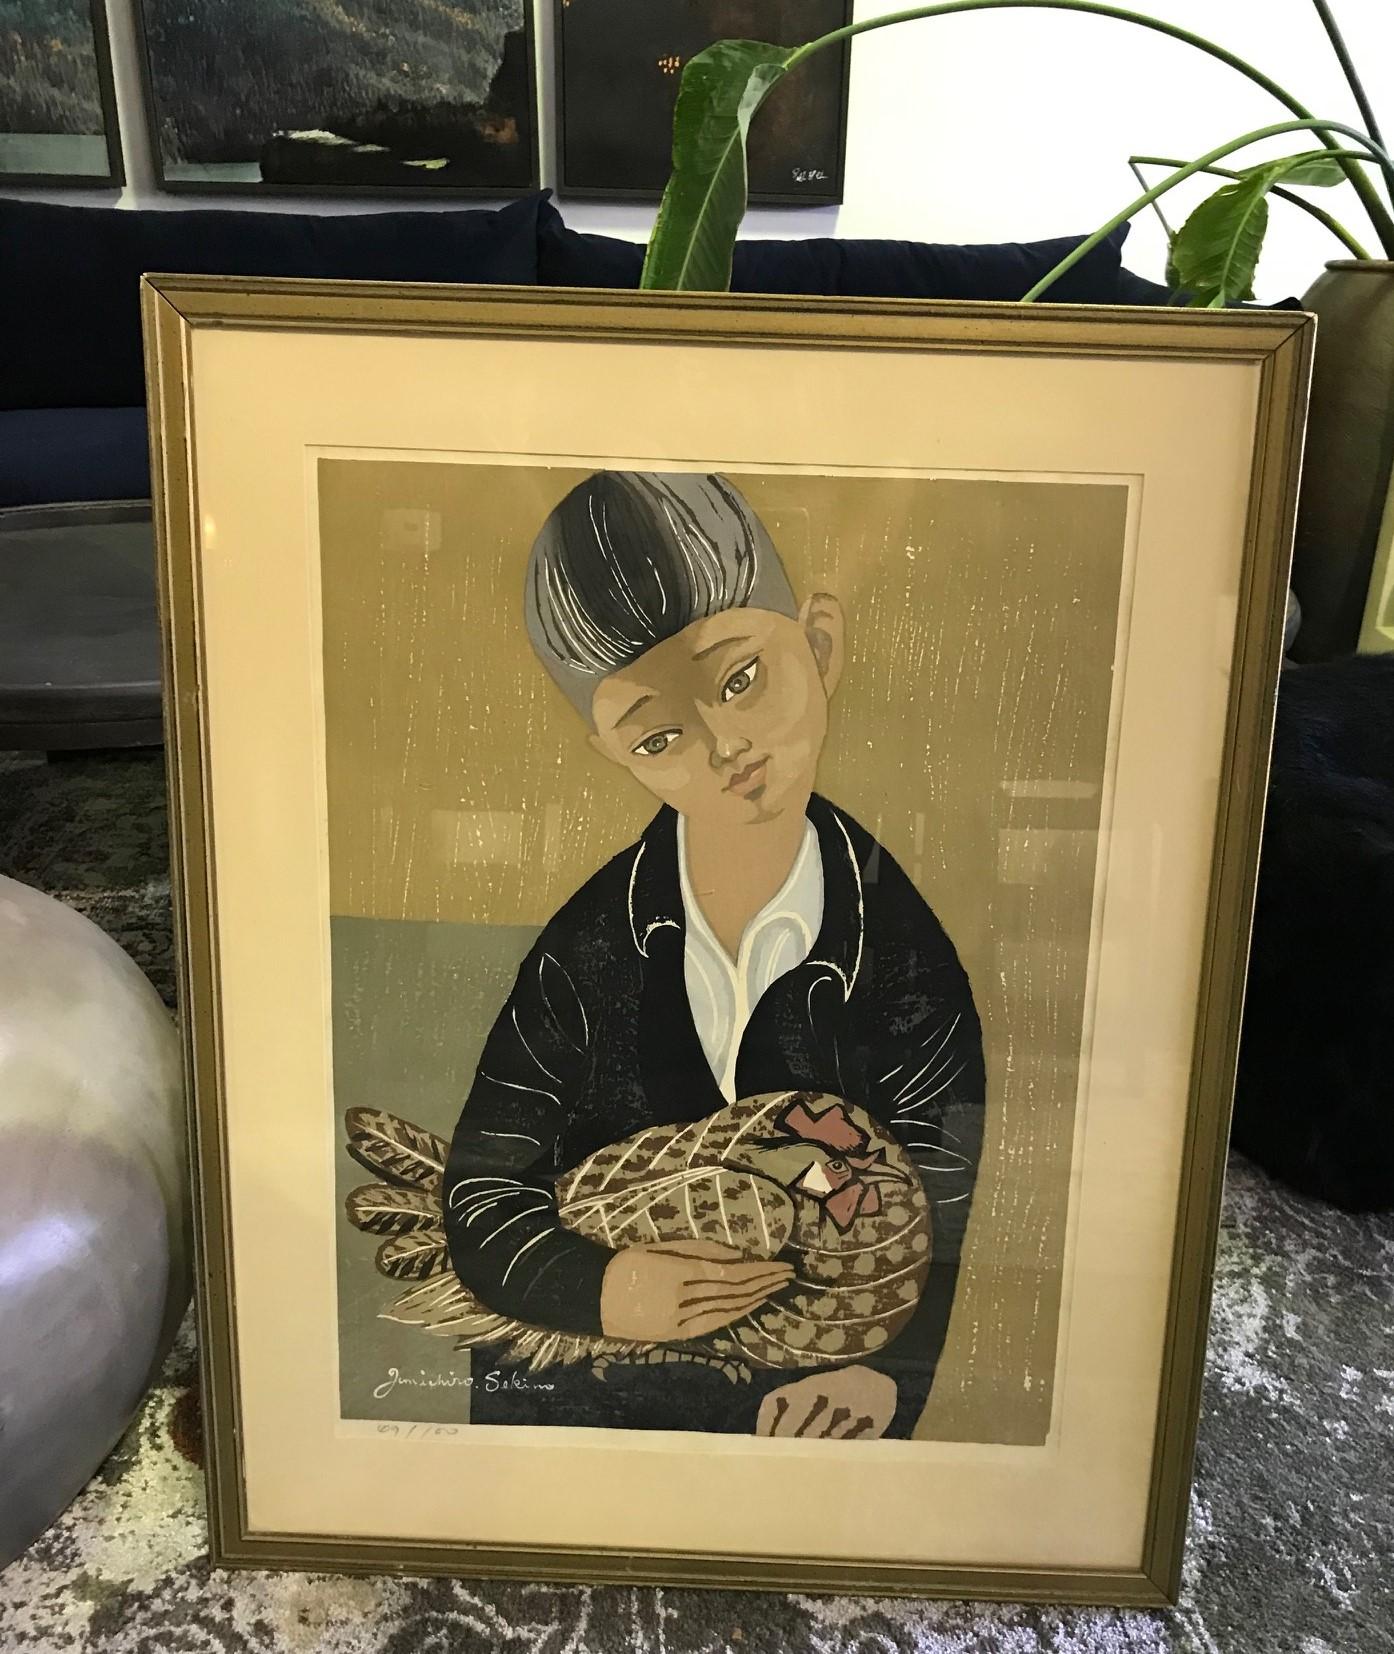 A wonderful portrait of a young boy (likely the artist's son) posing with his pet rooster by master Japanese artist or printer Junichiro Sekino.

The print is signed in ink within the image and numbered (69/100) by the artist. The image is a very